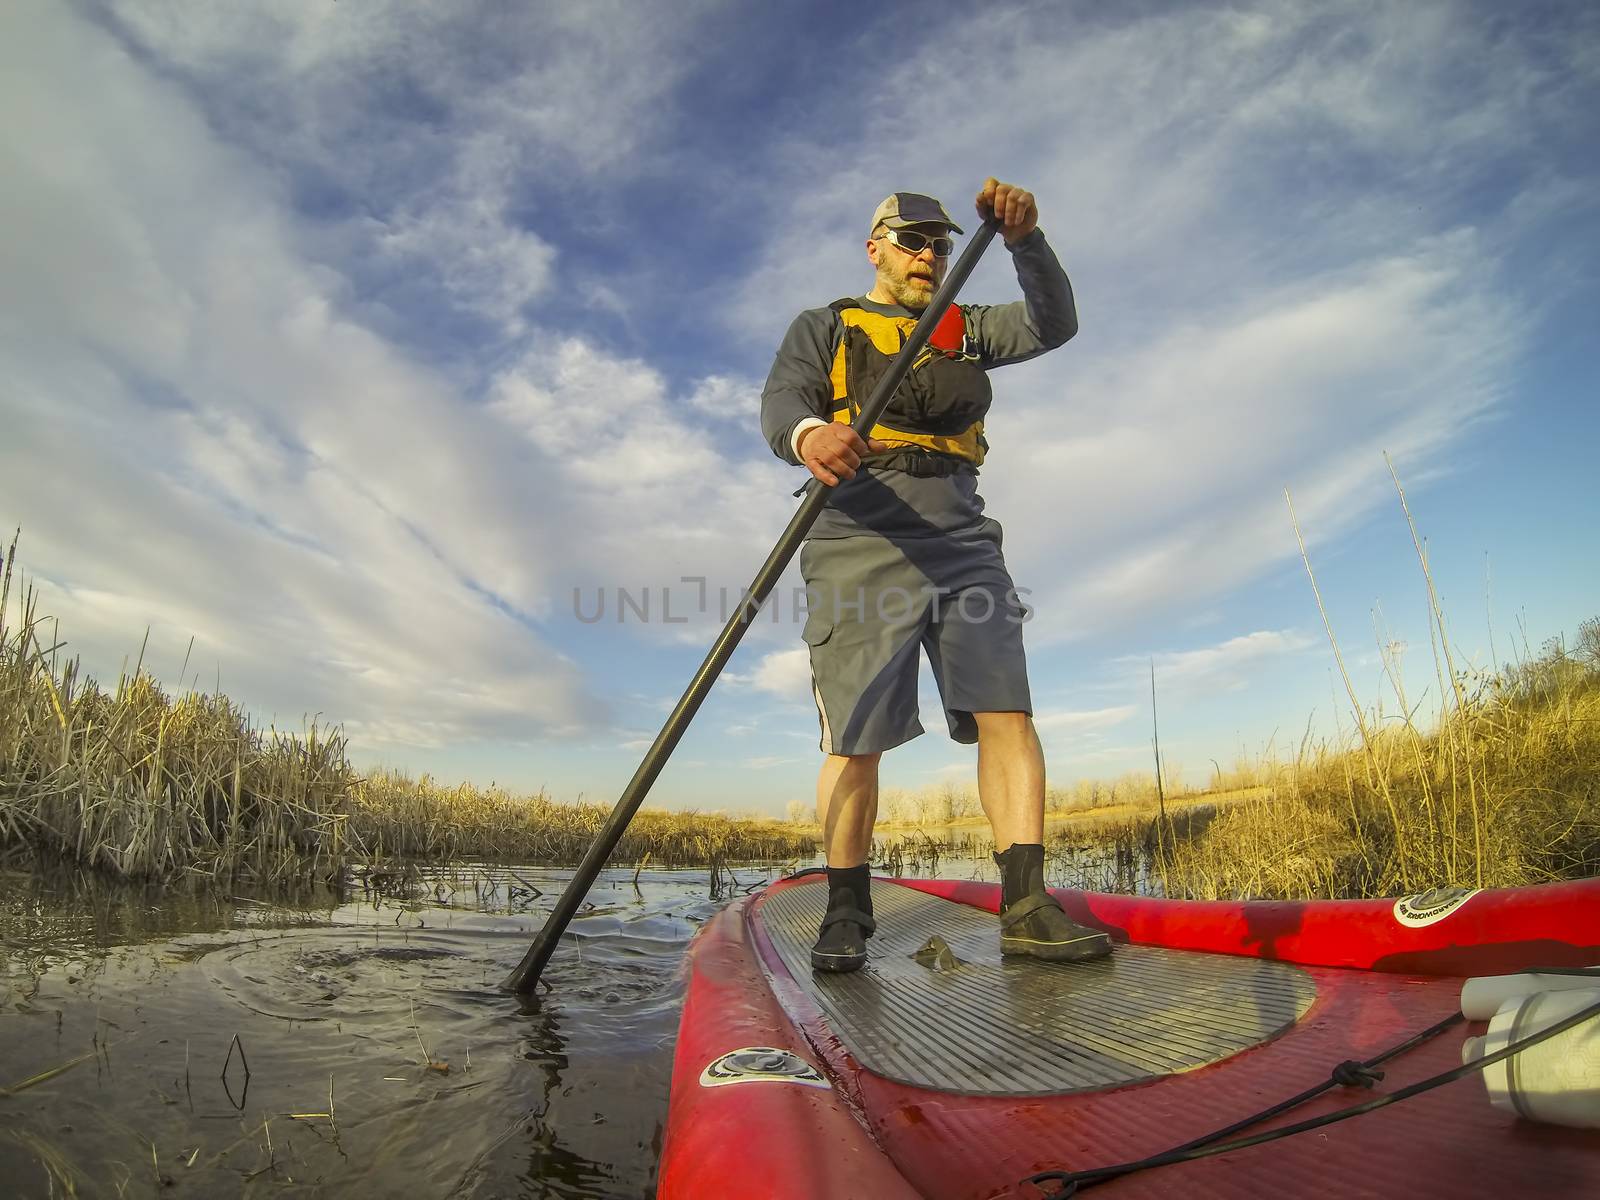 stand up paddling (SUP) in a wetland by PixelsAway